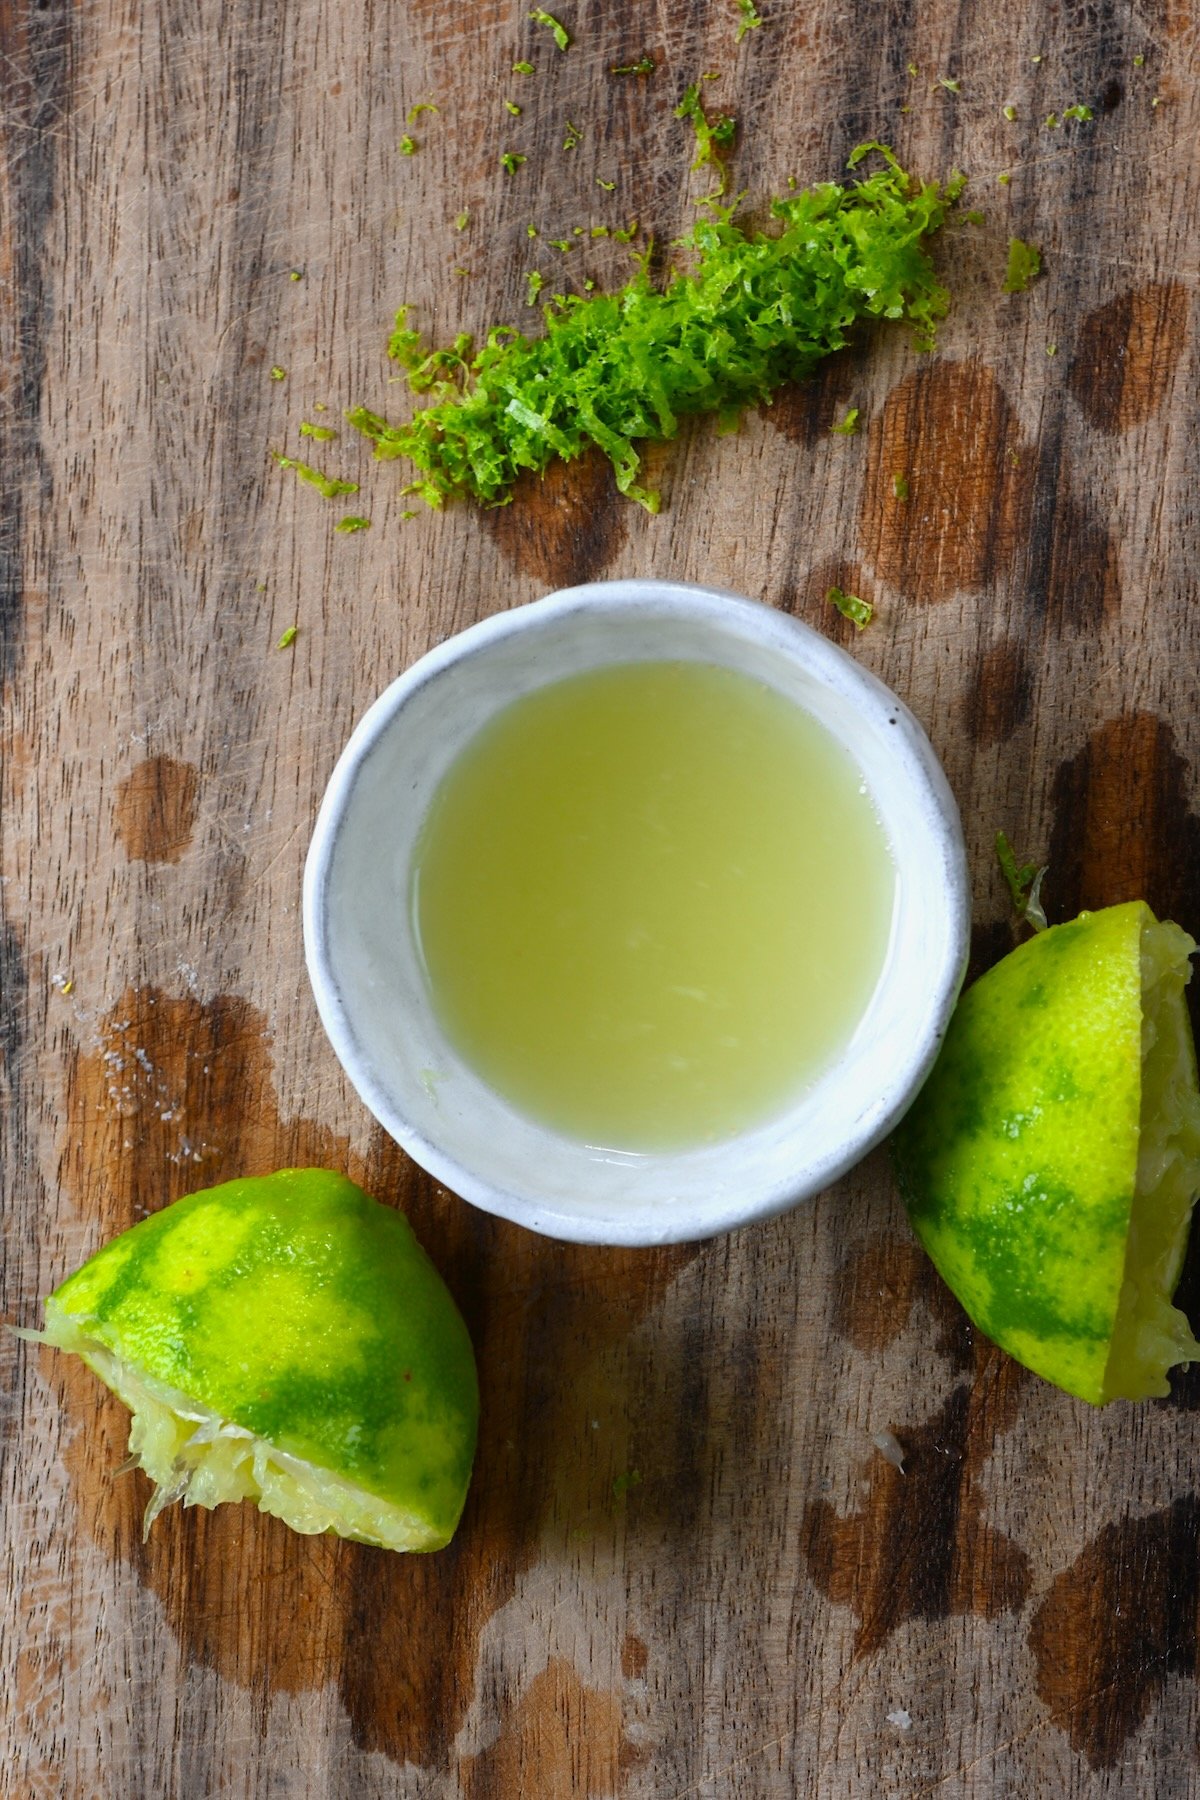 The juice and zest of lime